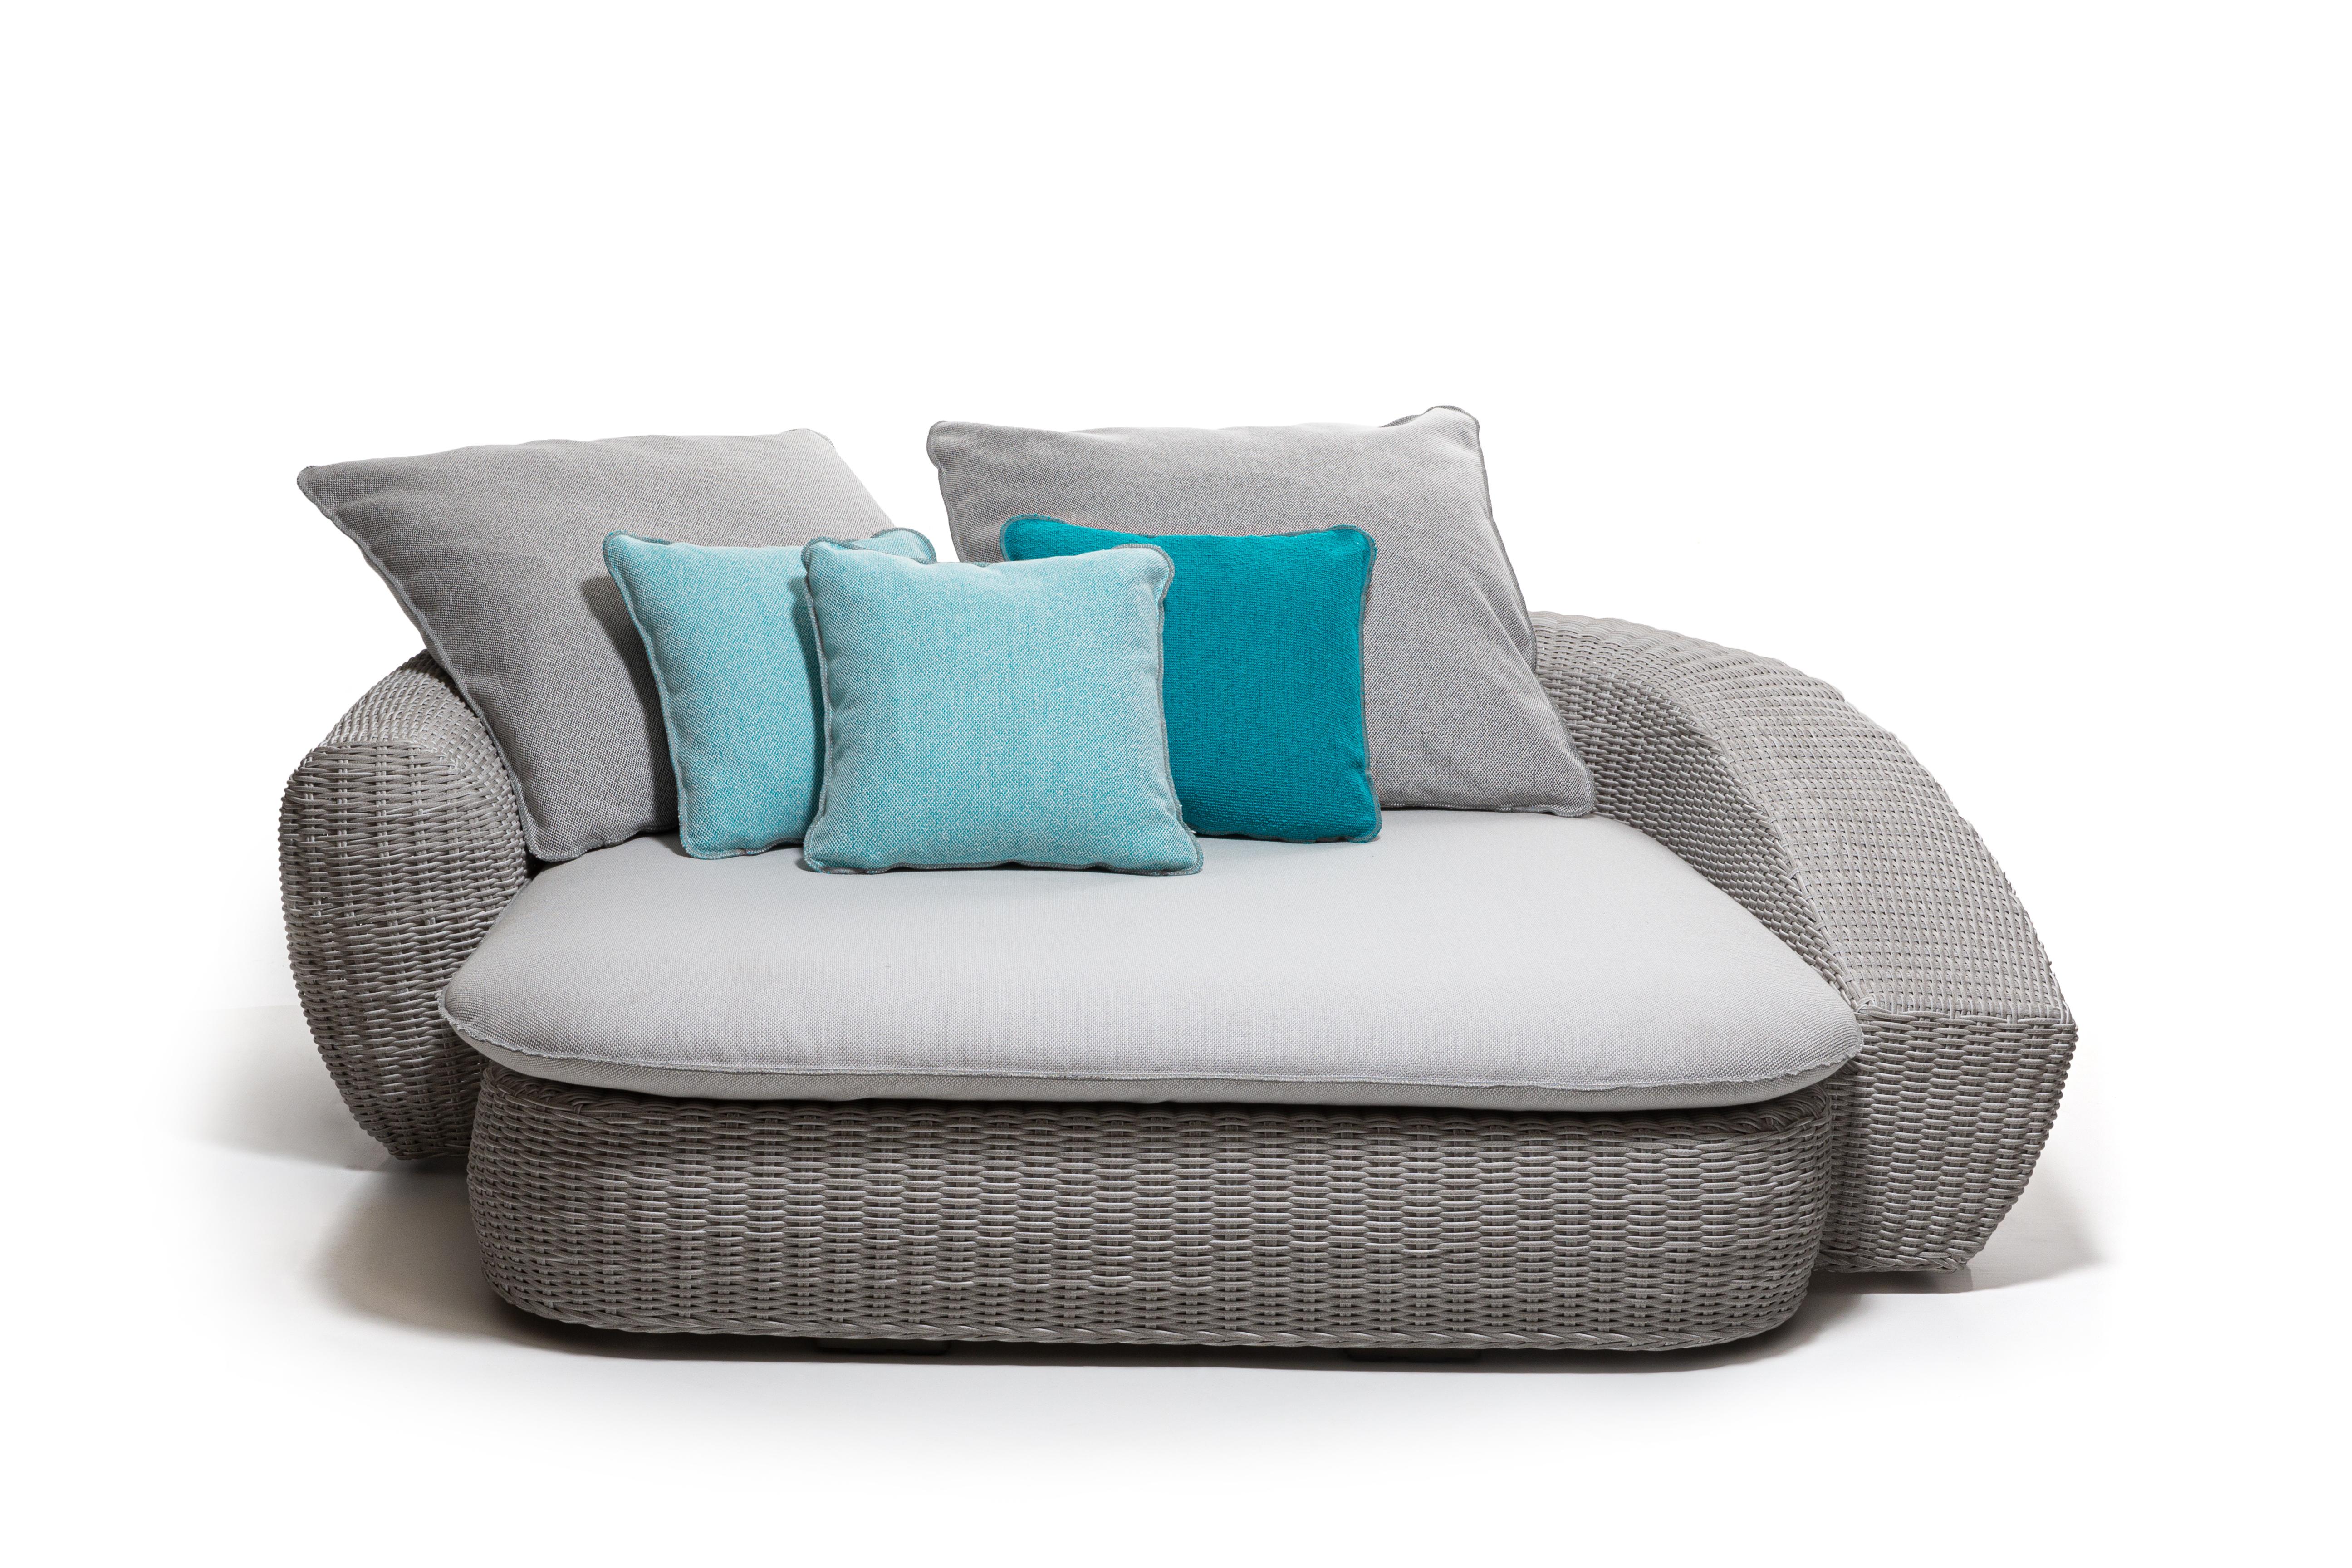 Soft and welcoming shapes and consistent volumes characterise the family of Panda 01/02/03 sofas, available in various sizes and depths. They are made with a structure and feet in aluminium and weave in white or grey Panda Resin synthetic